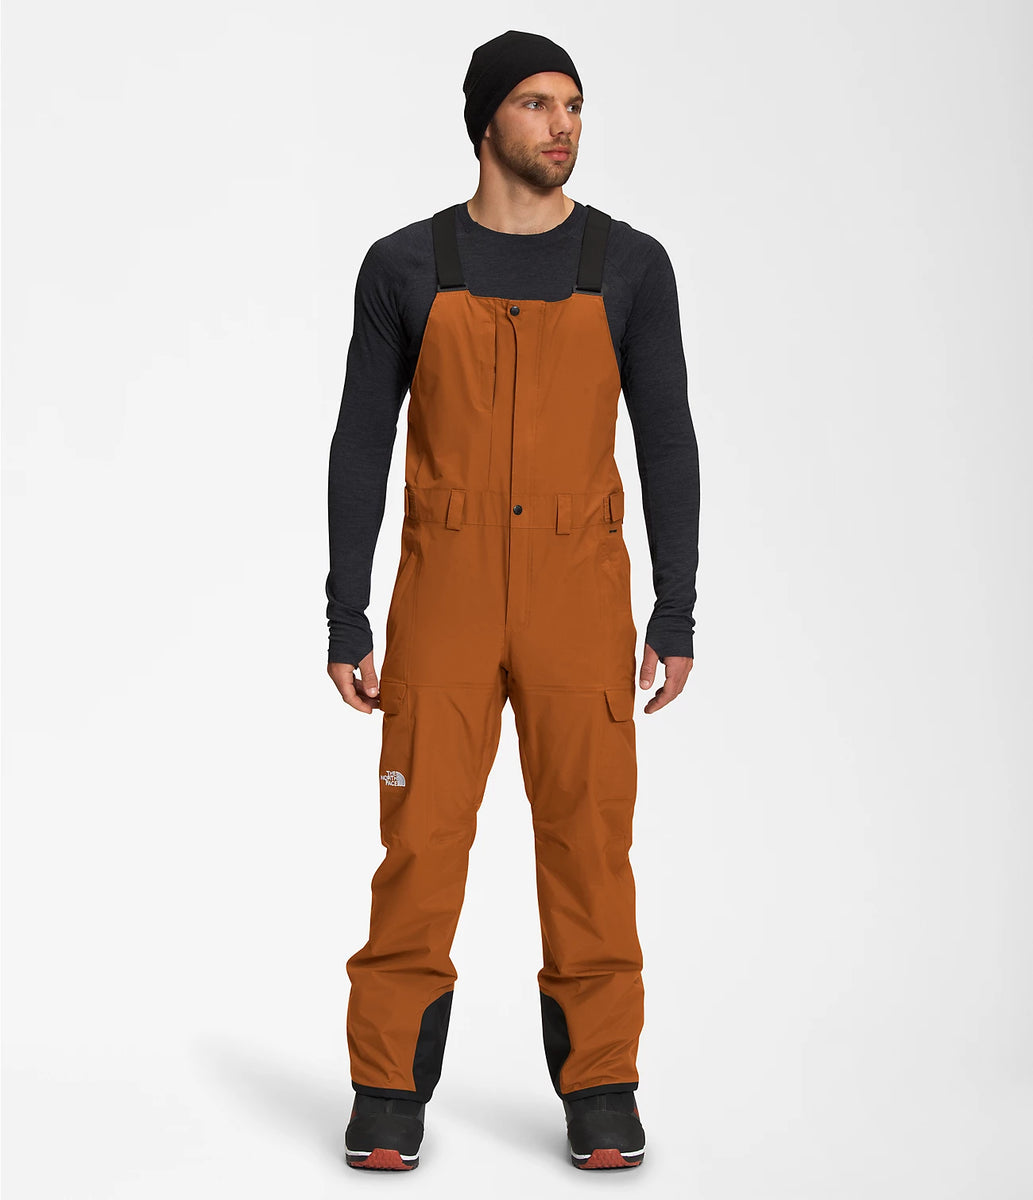 Fishing Waders for Men for sale in St. John's, Newfoundland and